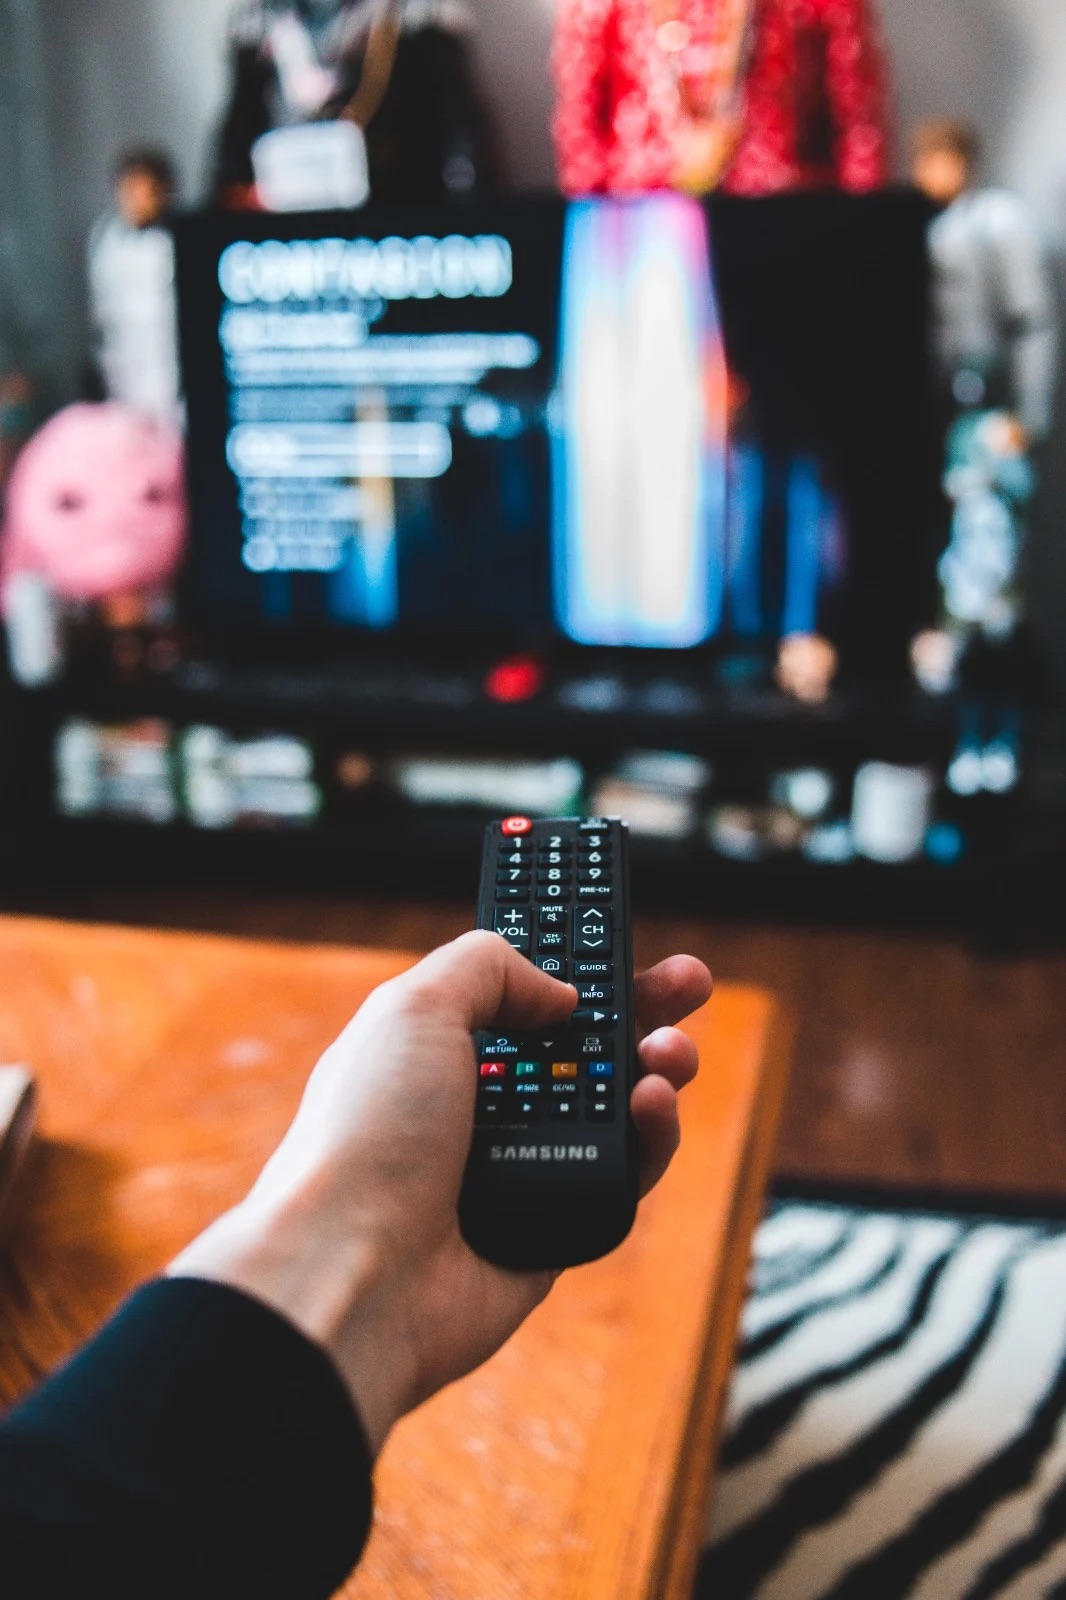 US TV VIEWERS FIND SHORTER ADS MORE REASONABLE